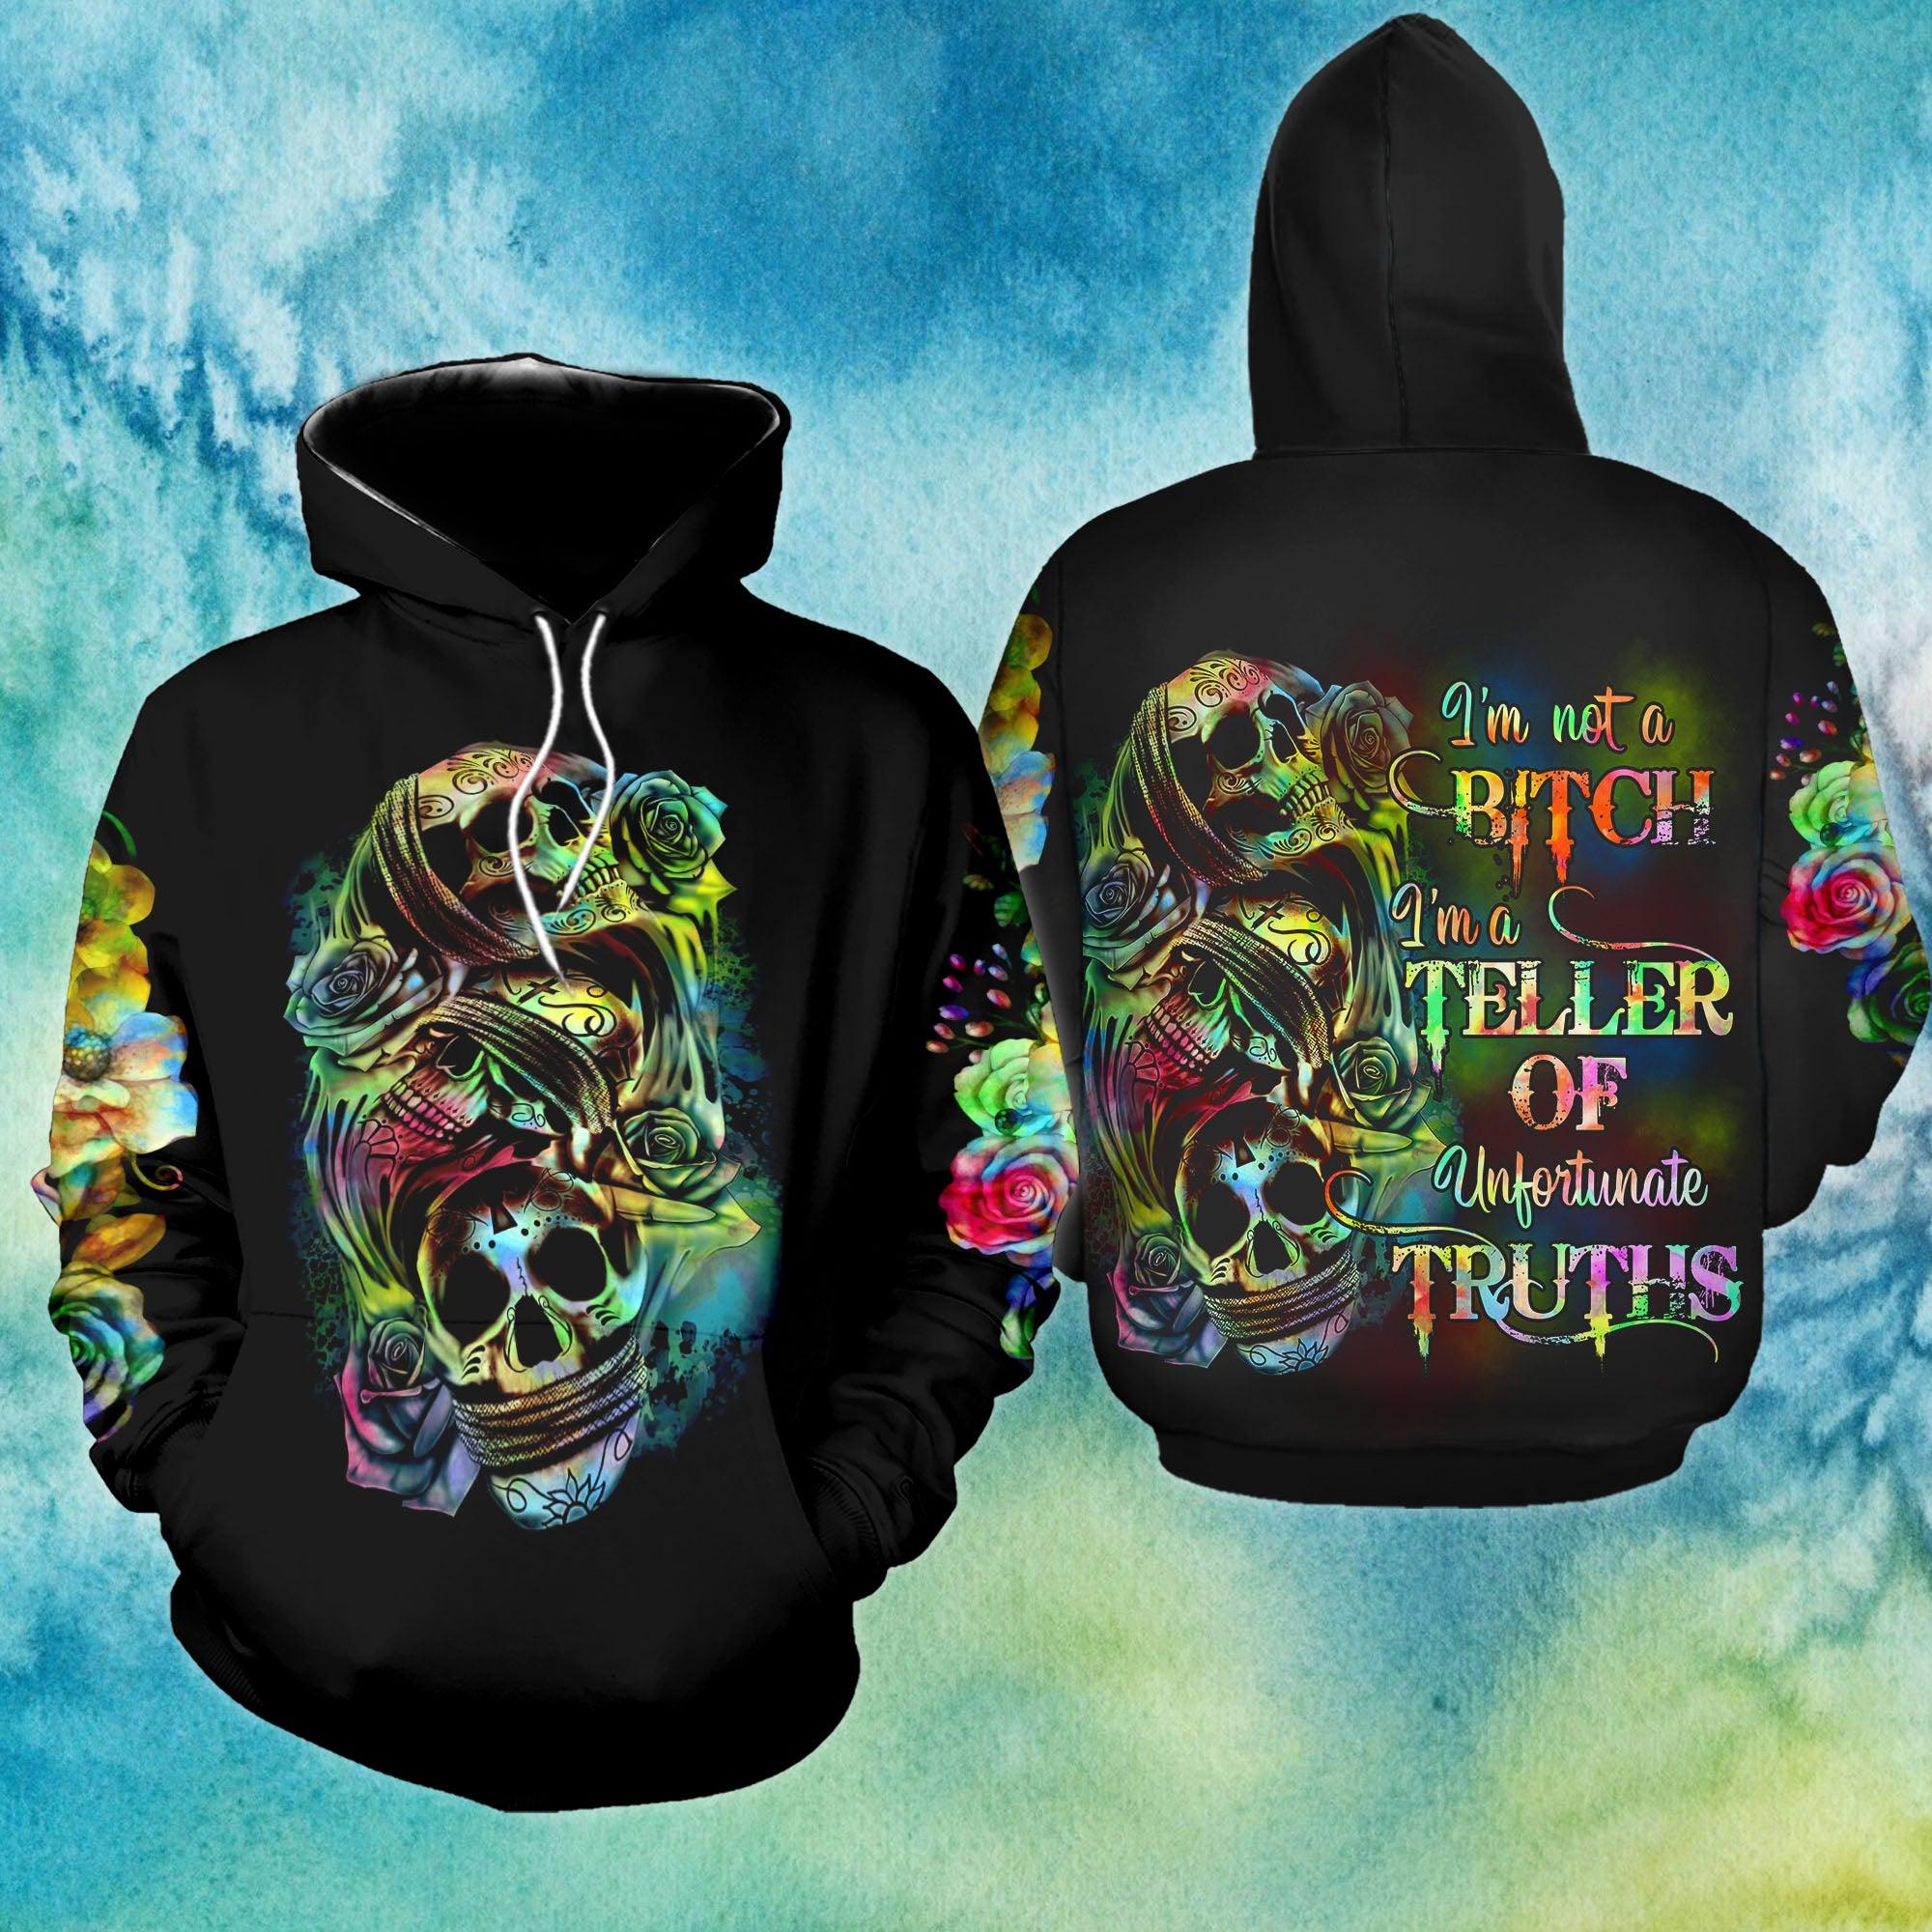 I'm Not A Bitch I'm A Teller Of Unfortunate Truths Funny Hoodie For Women - Wonder Skull